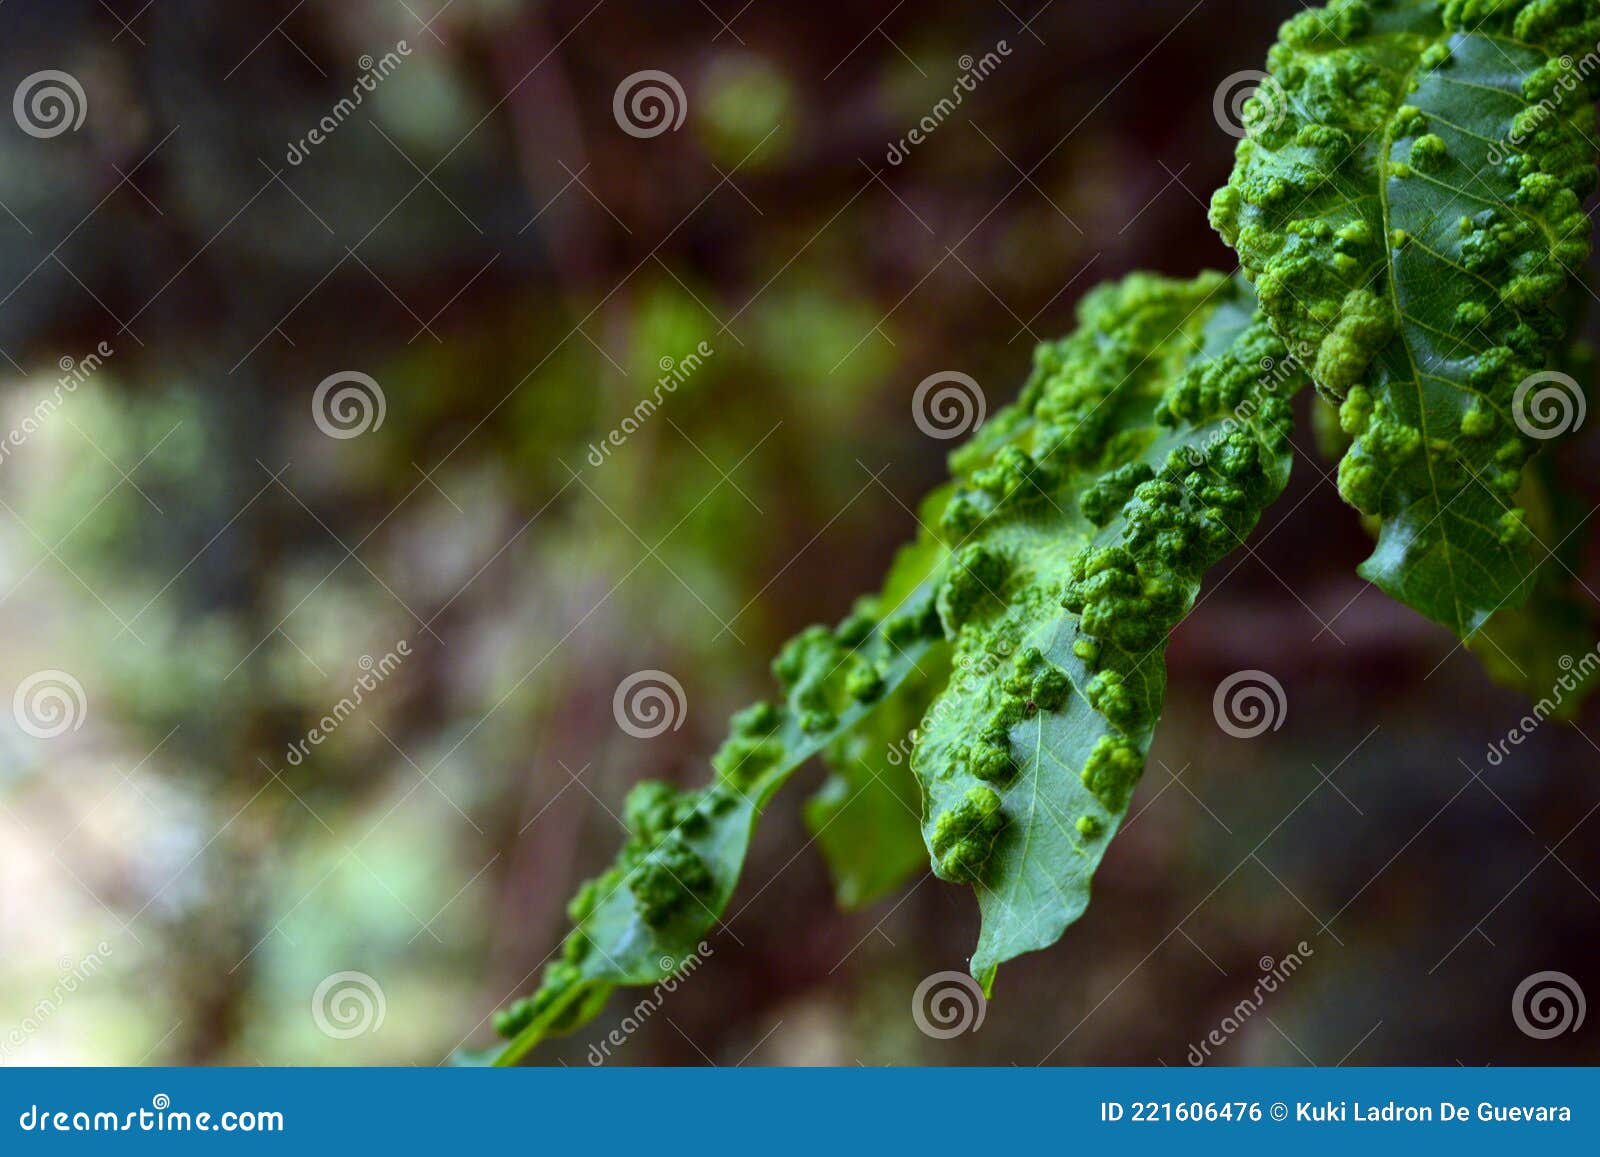 leaves of plants infected by a fungus